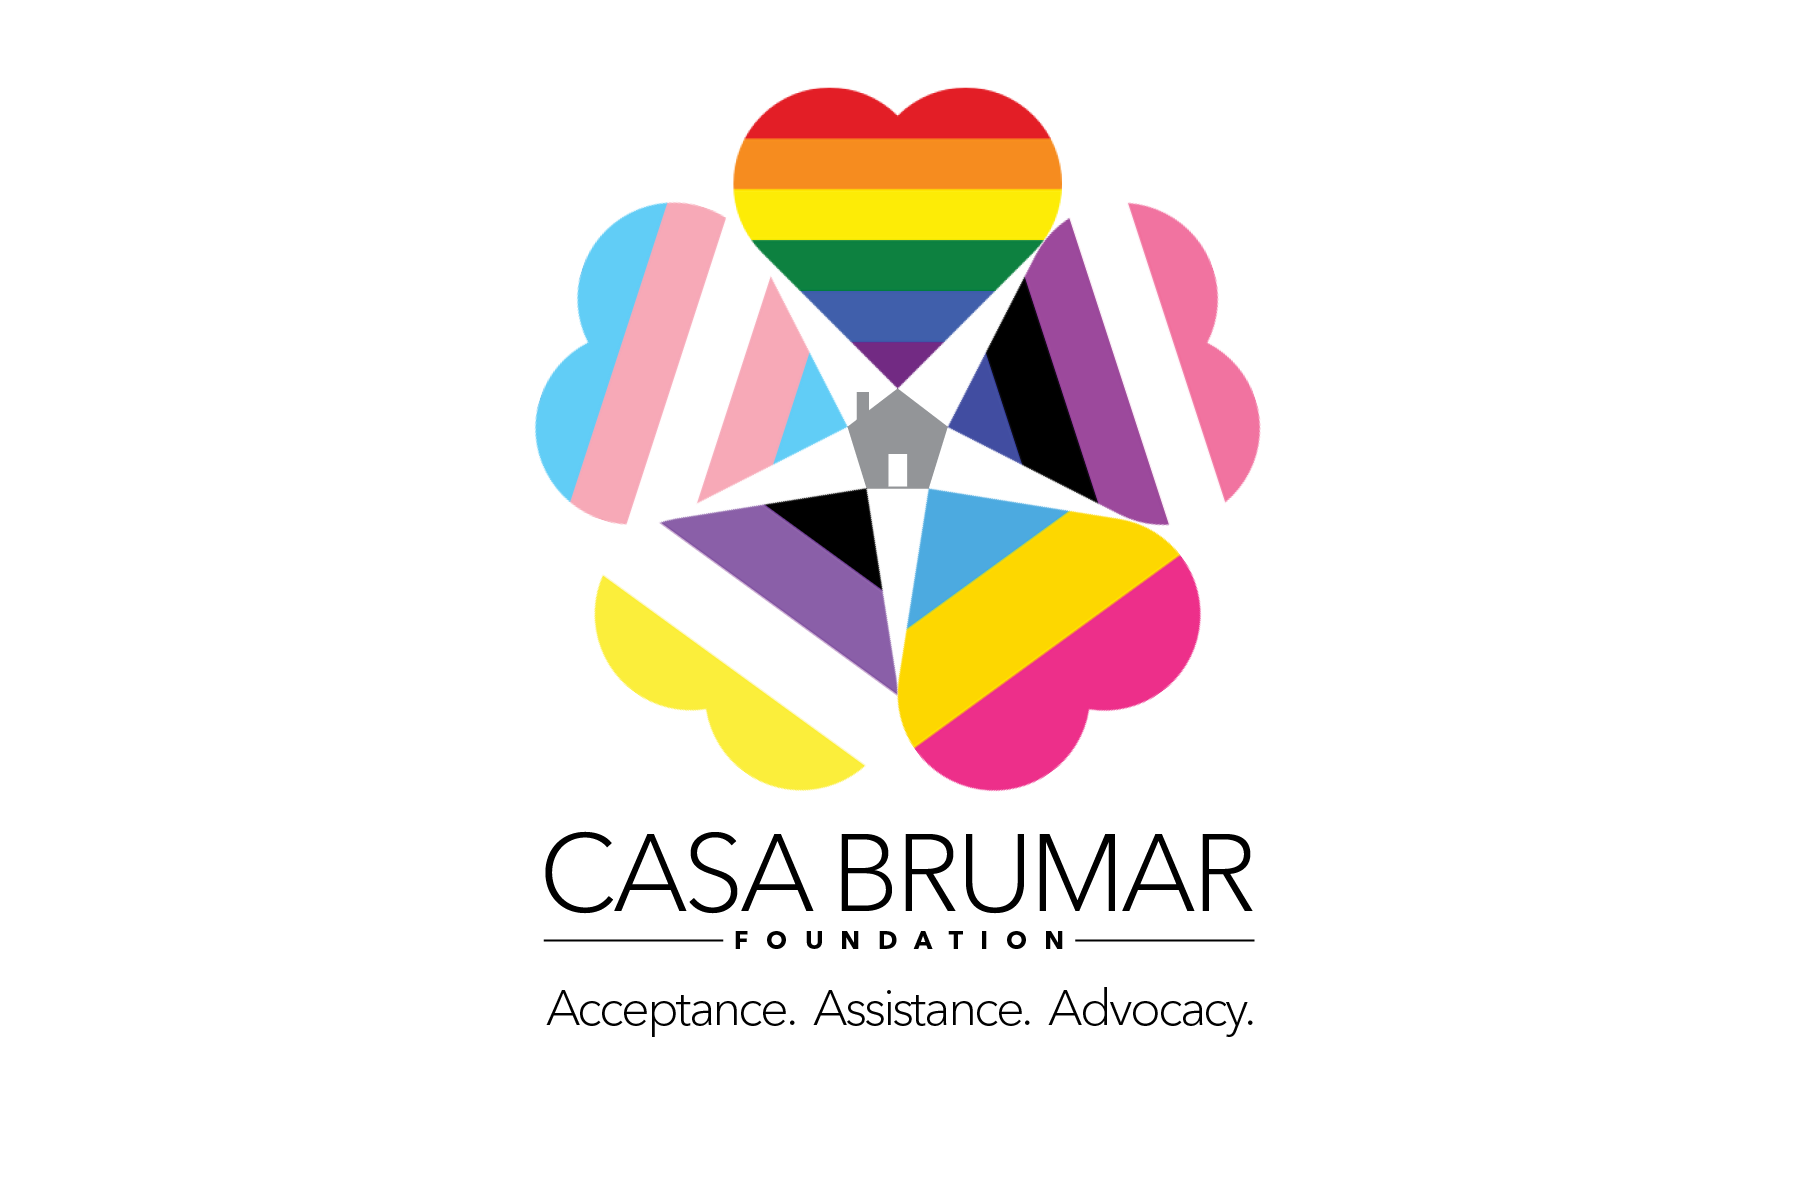 Casa BruMar Foundation's mission is to build the first LGBTQ+ community center in Northern Virginia.